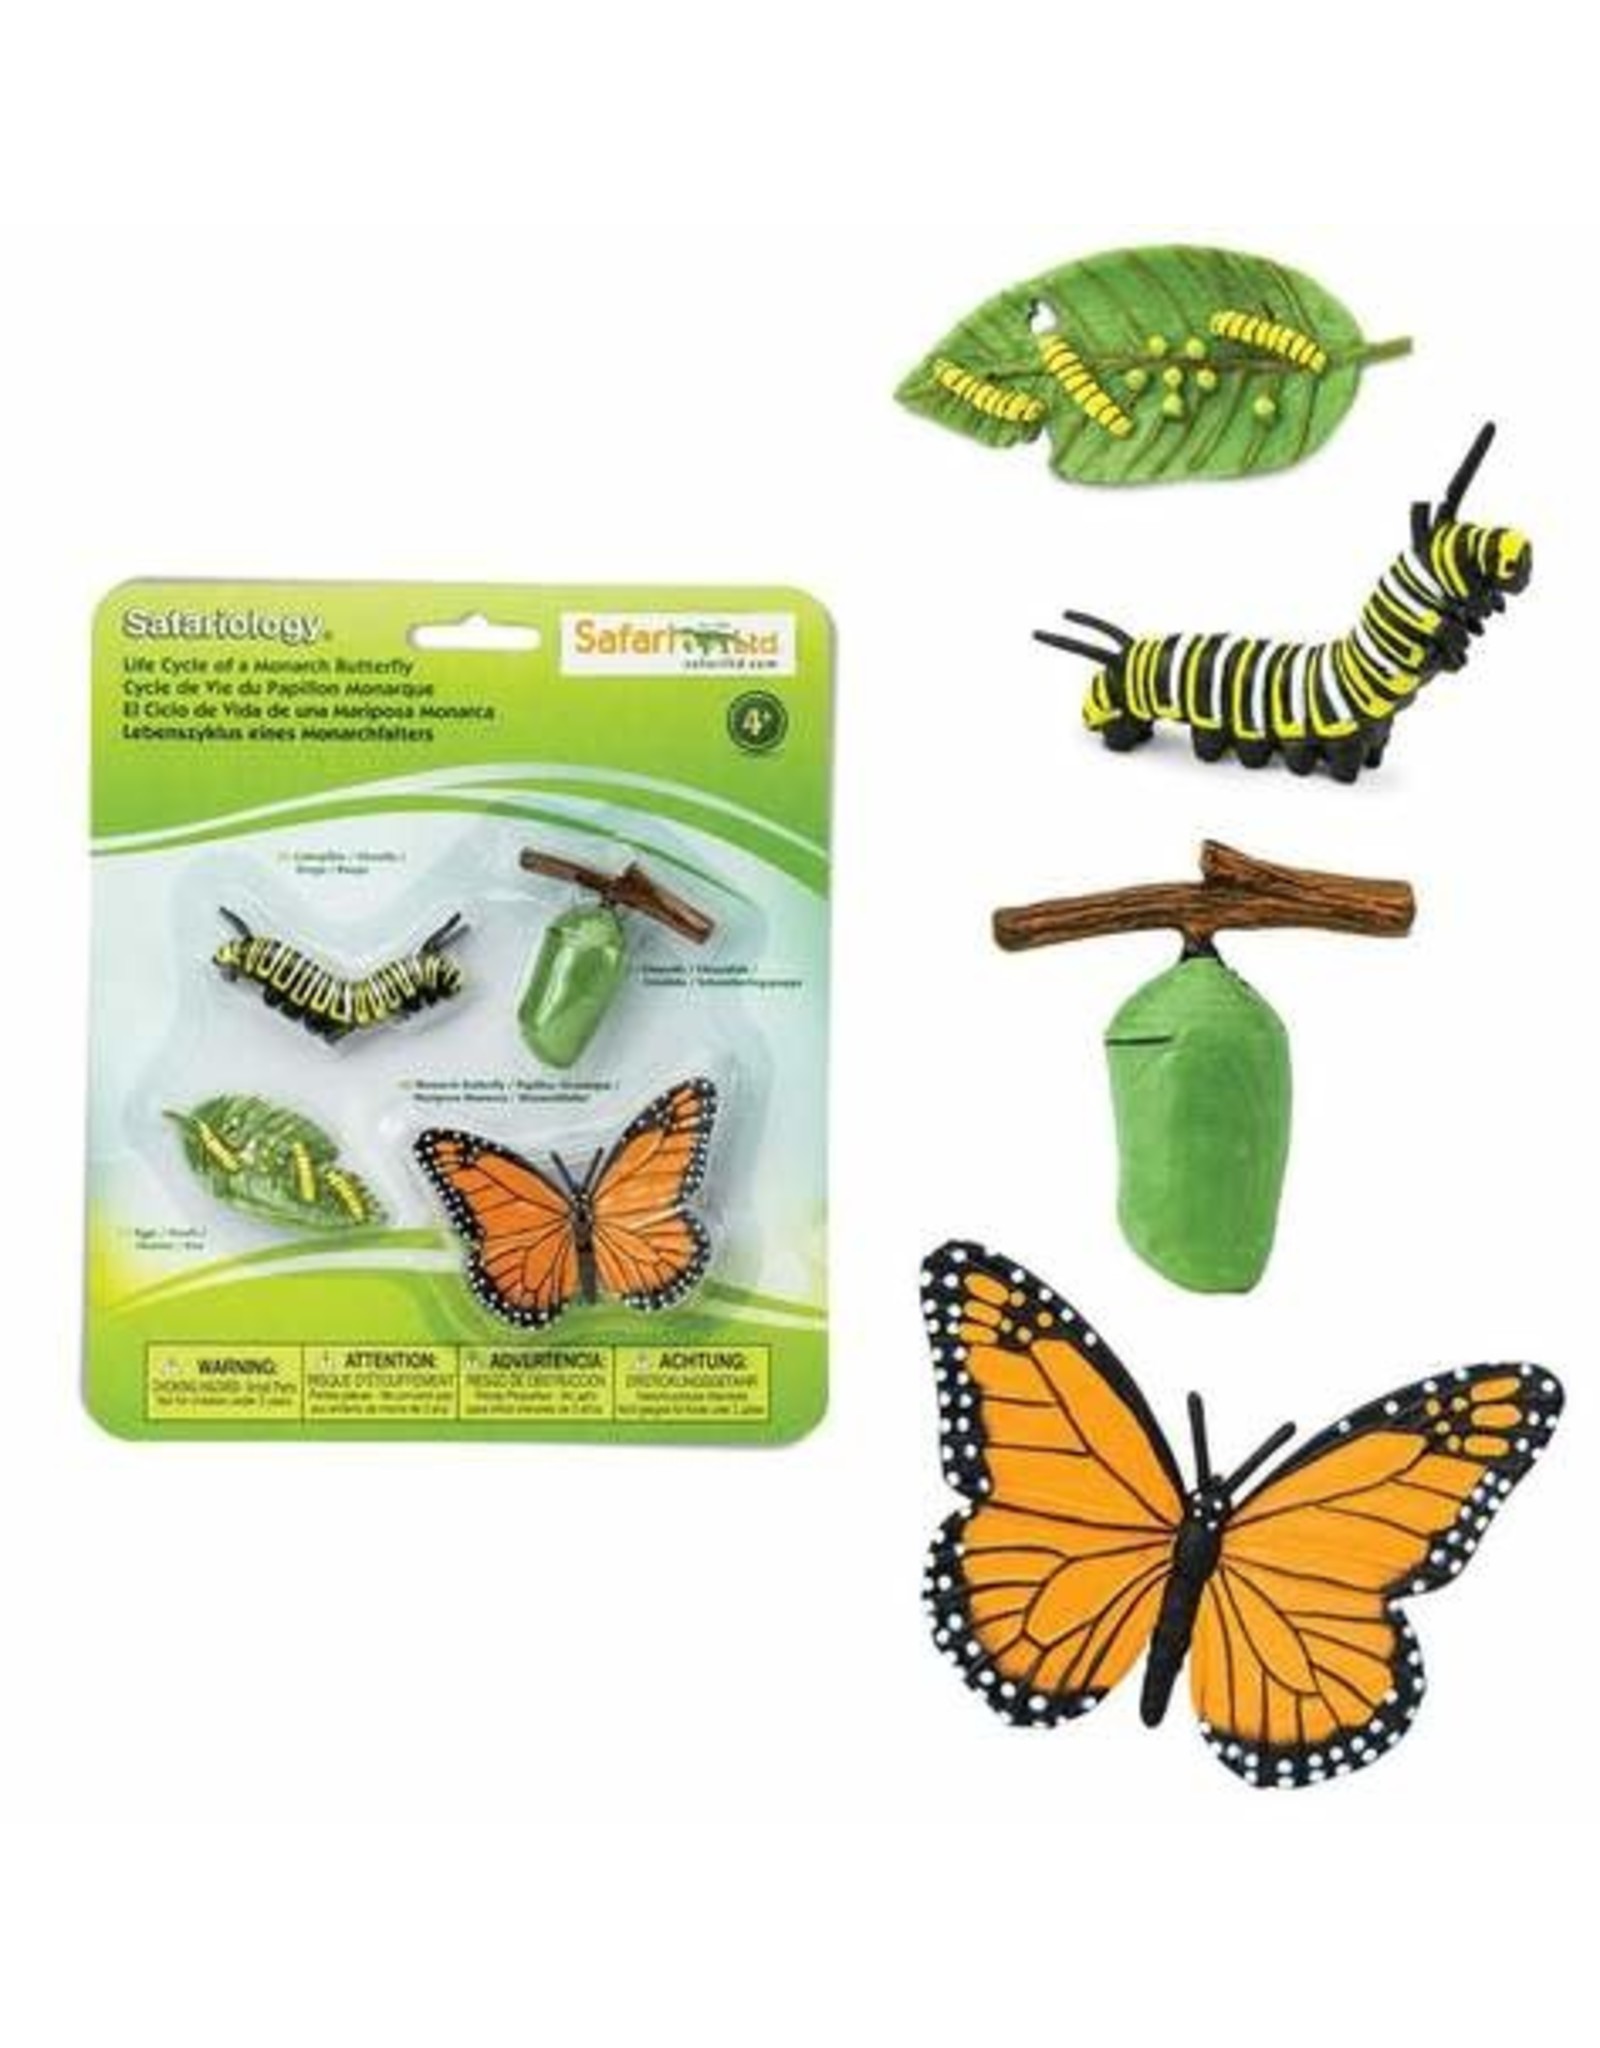 Safari Life Cycle of a Monarch Butterfly